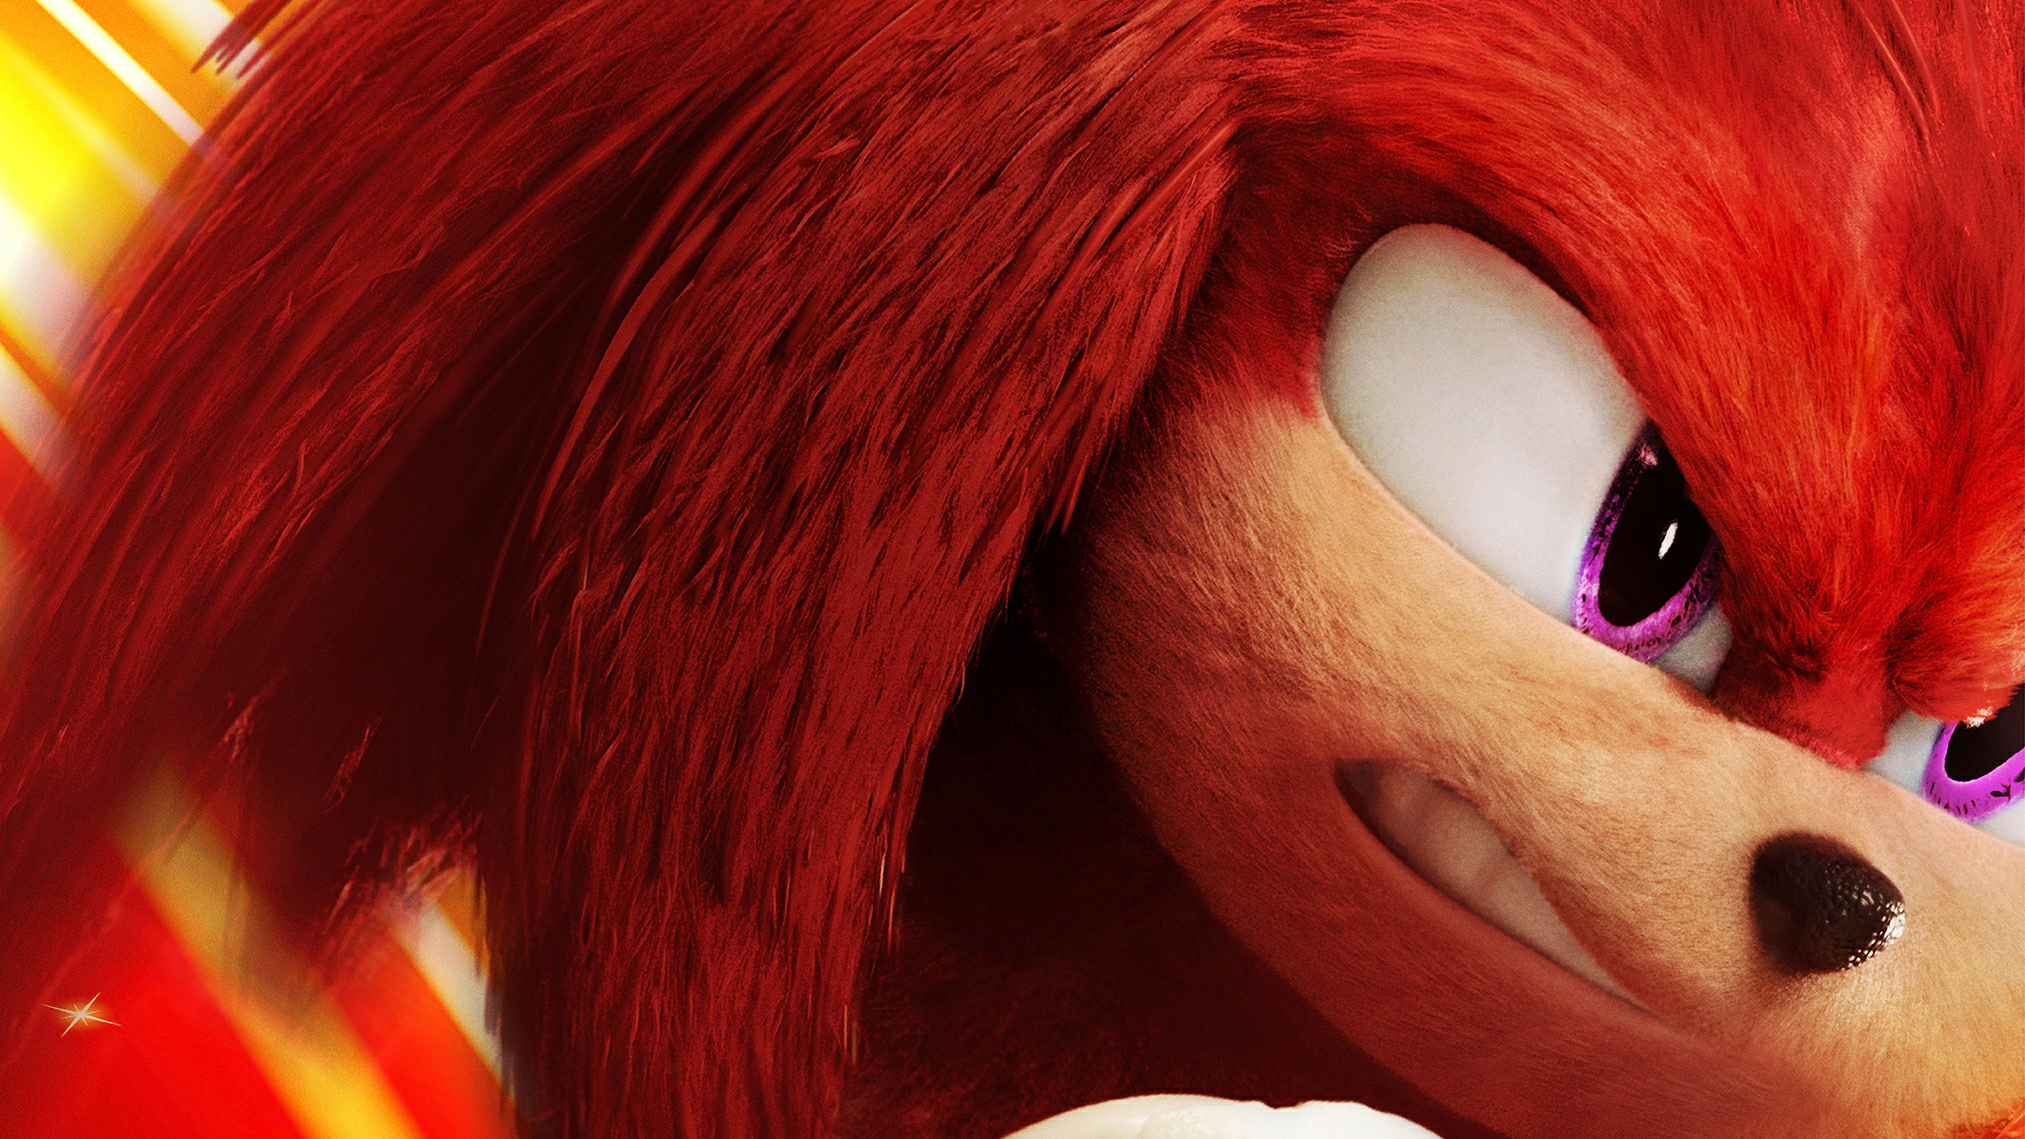 movie, sonic the hedgehog 2, knuckles the echidna, sonic